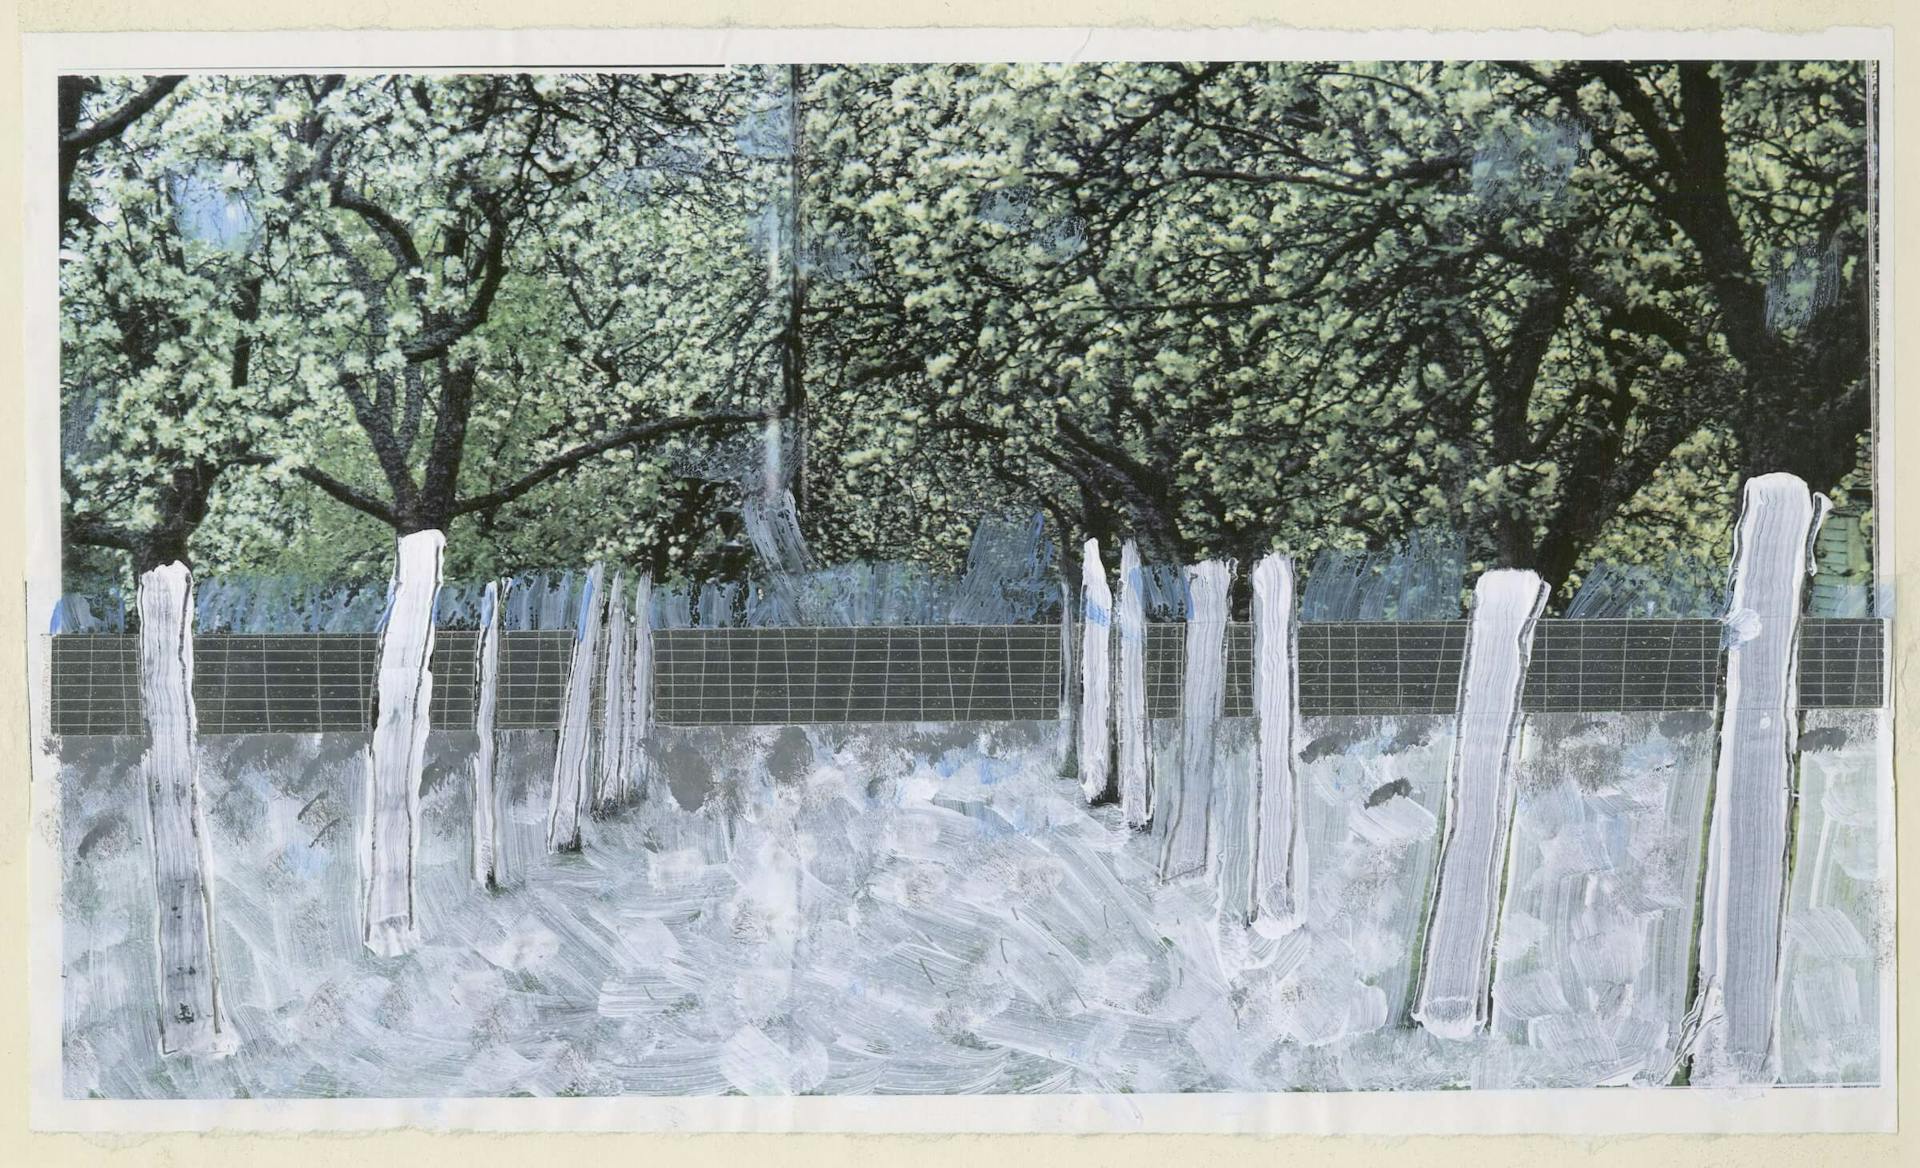 OMA, Yves Brunier, in collaboration with Petra Baisse. Design for apple orchard with mirrored wall behind it, ca. 1988. Collection Het Nieuwe Instituut, OMA archive, OMAR 4356 